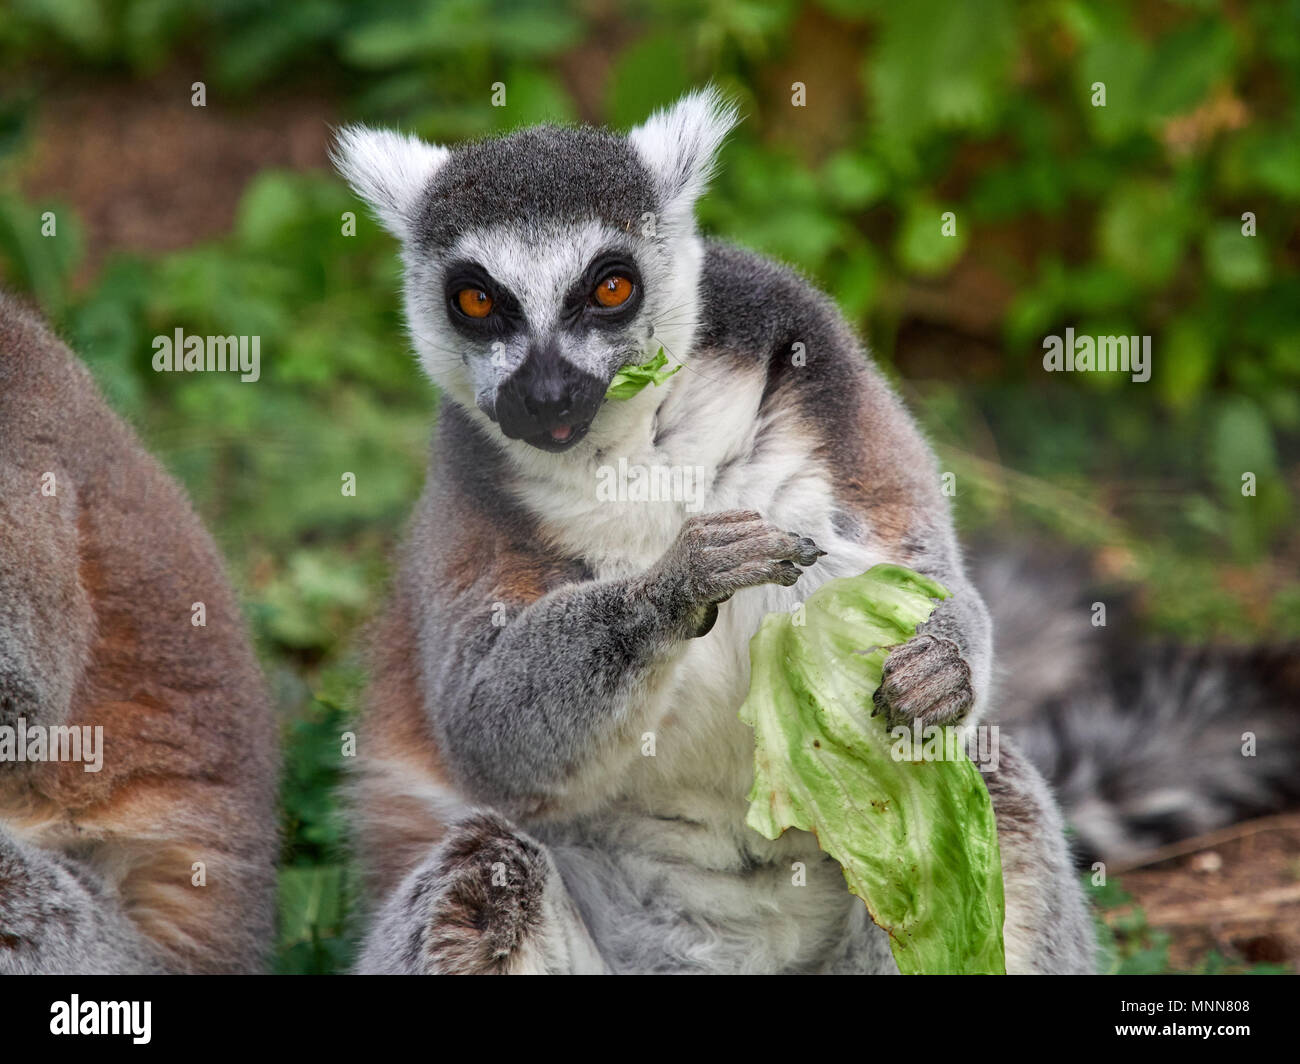 The ringtailed lemur with red eyes and light hair looks straight into the lens, photographing the animal from a close distance. Stock Photo